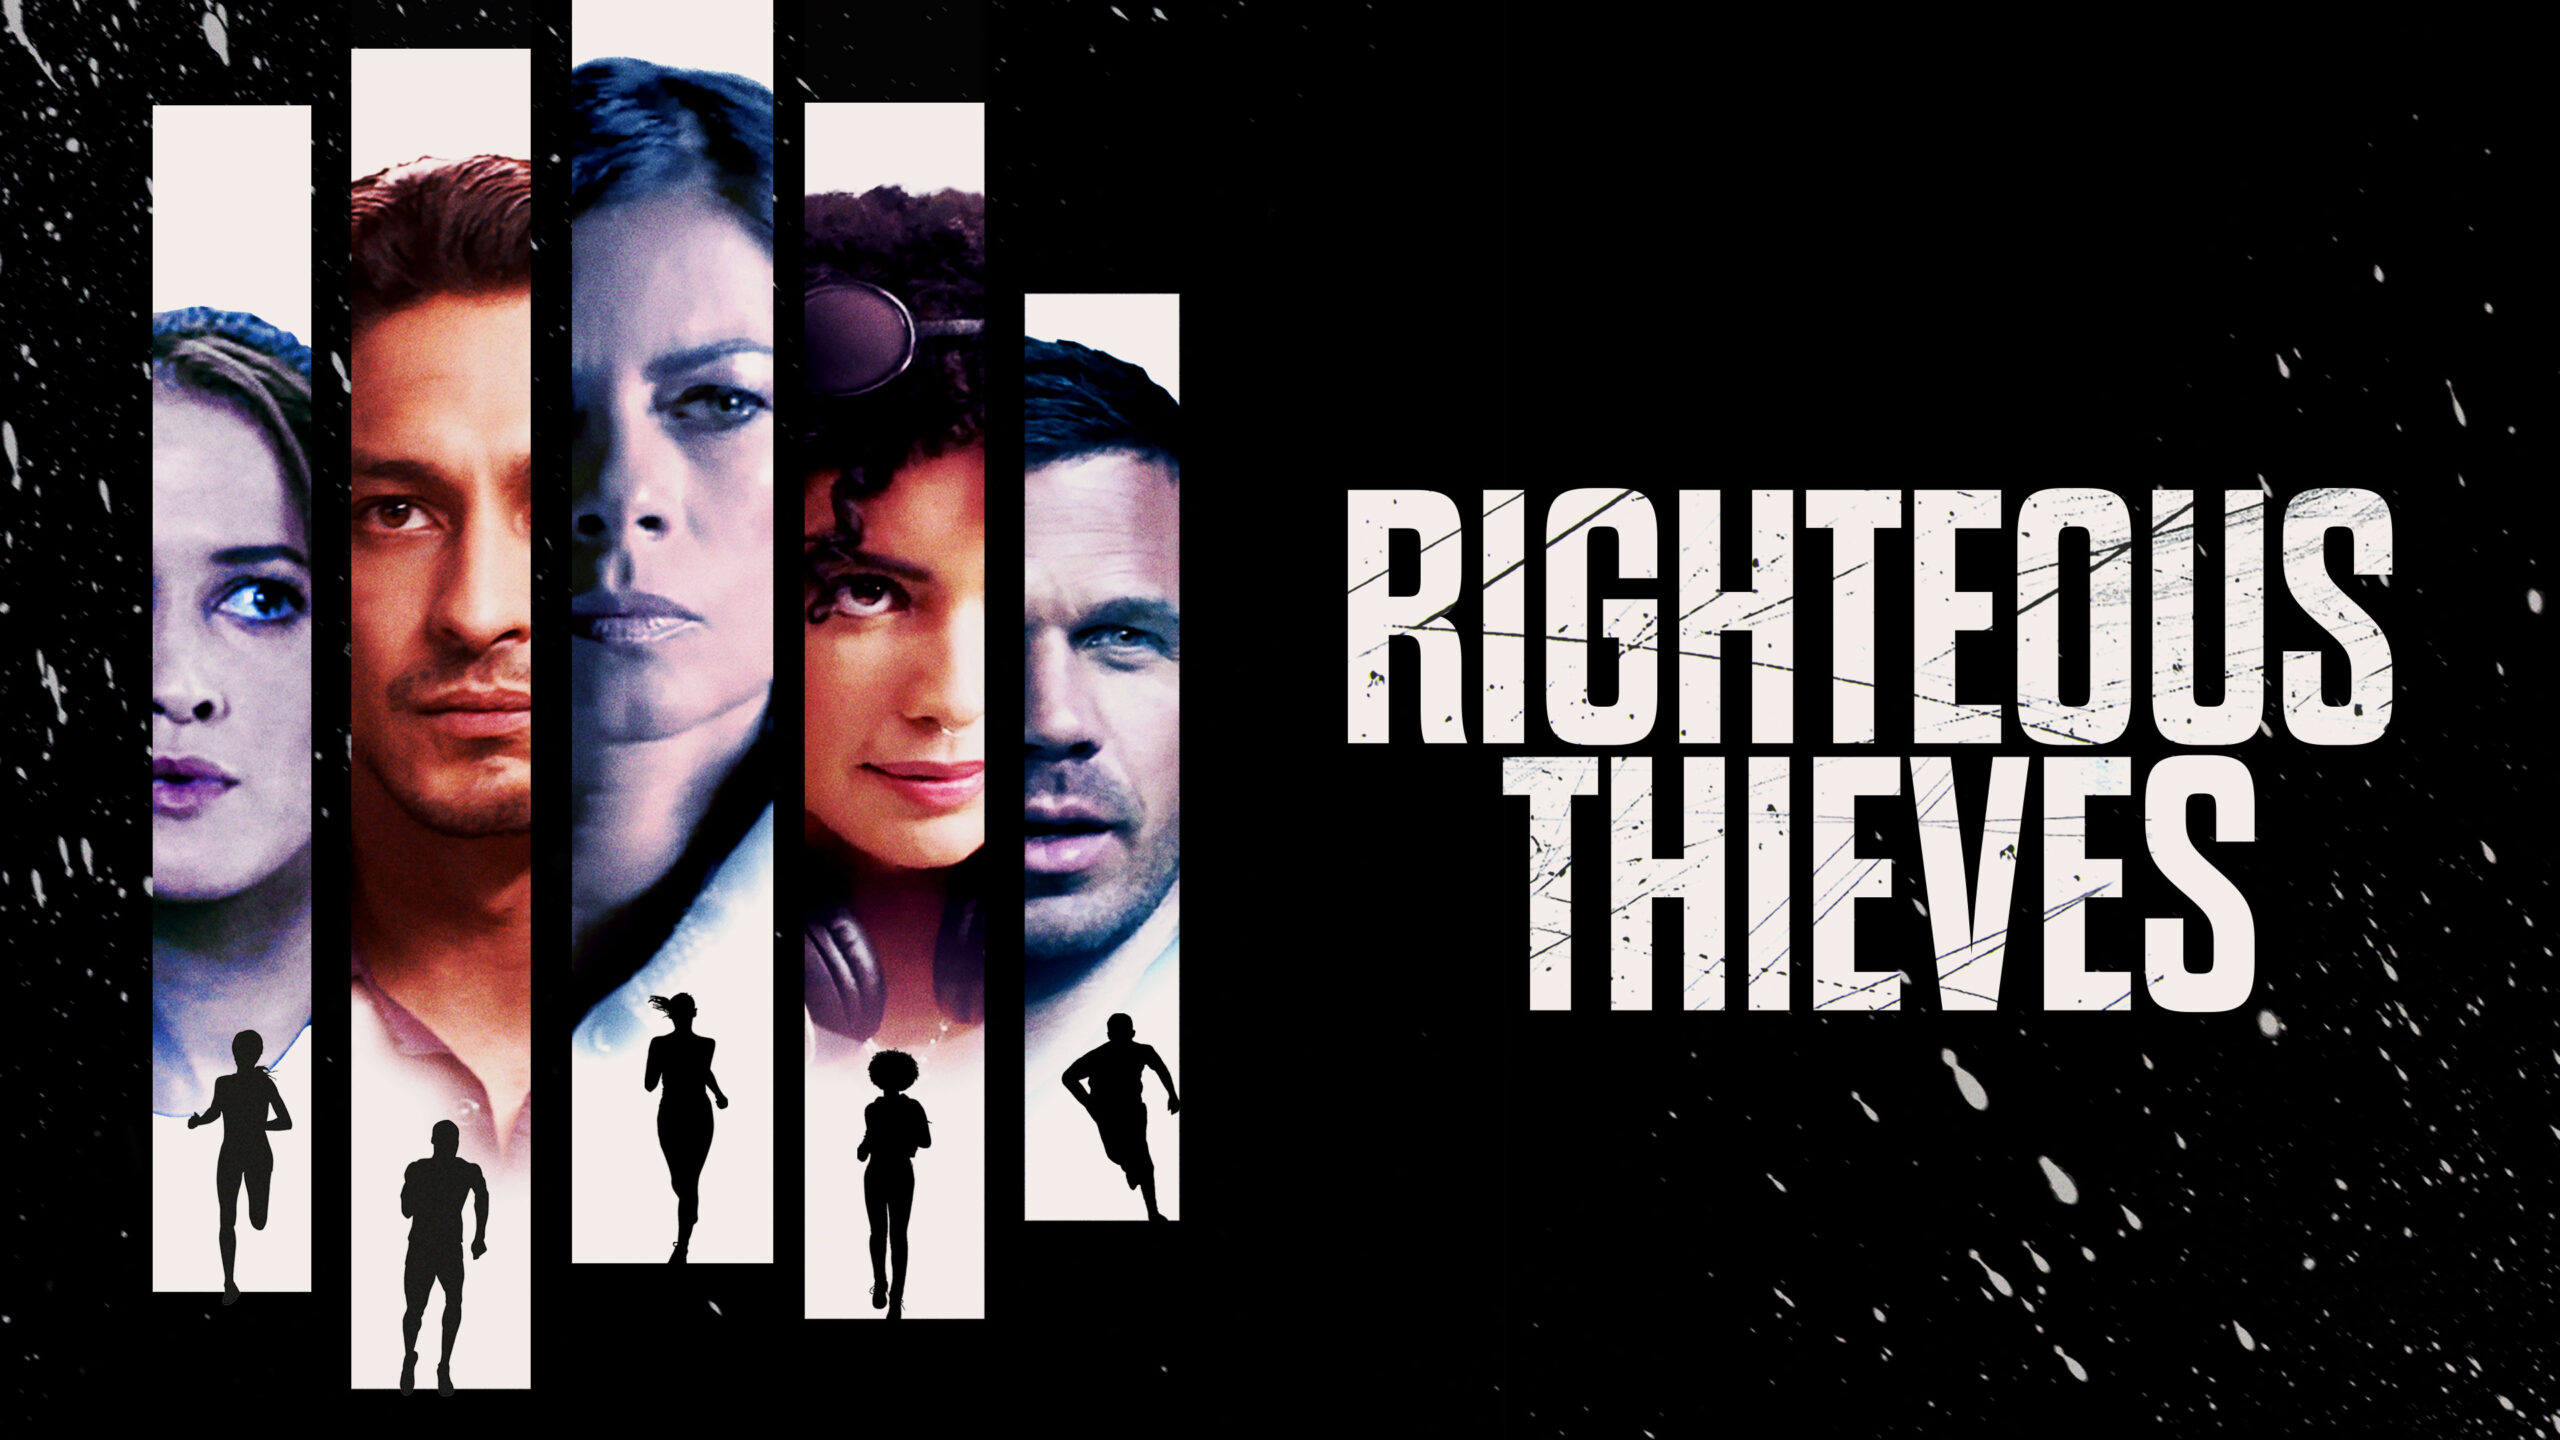 Righteous Thieves | Exclusive Trailer